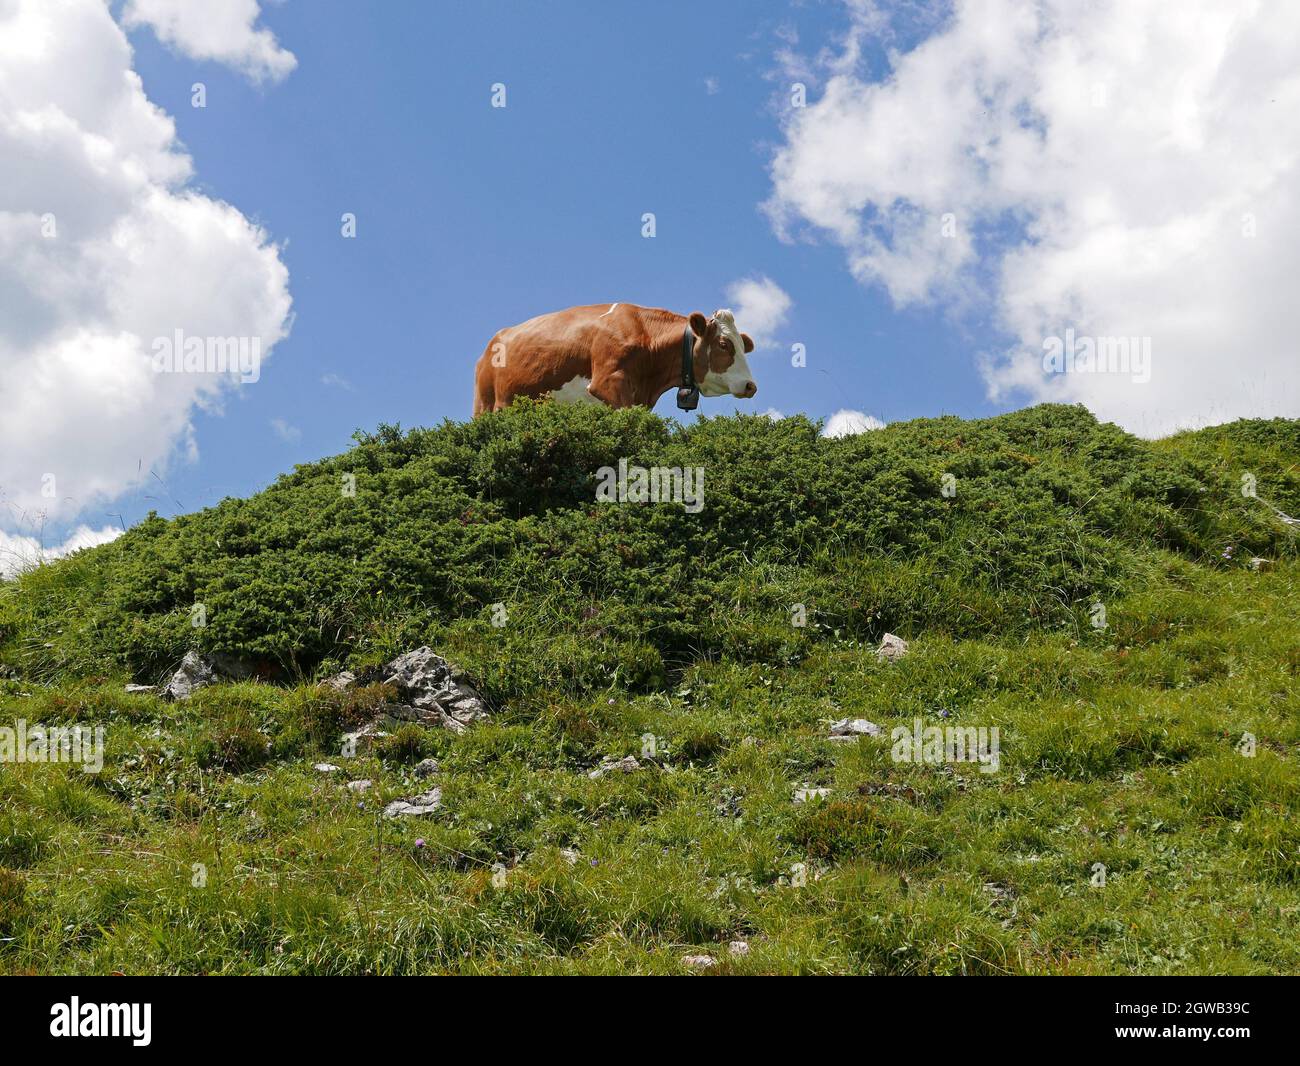 Grazing Cow In A Relaxing And Bucolic Setting Stock Photo